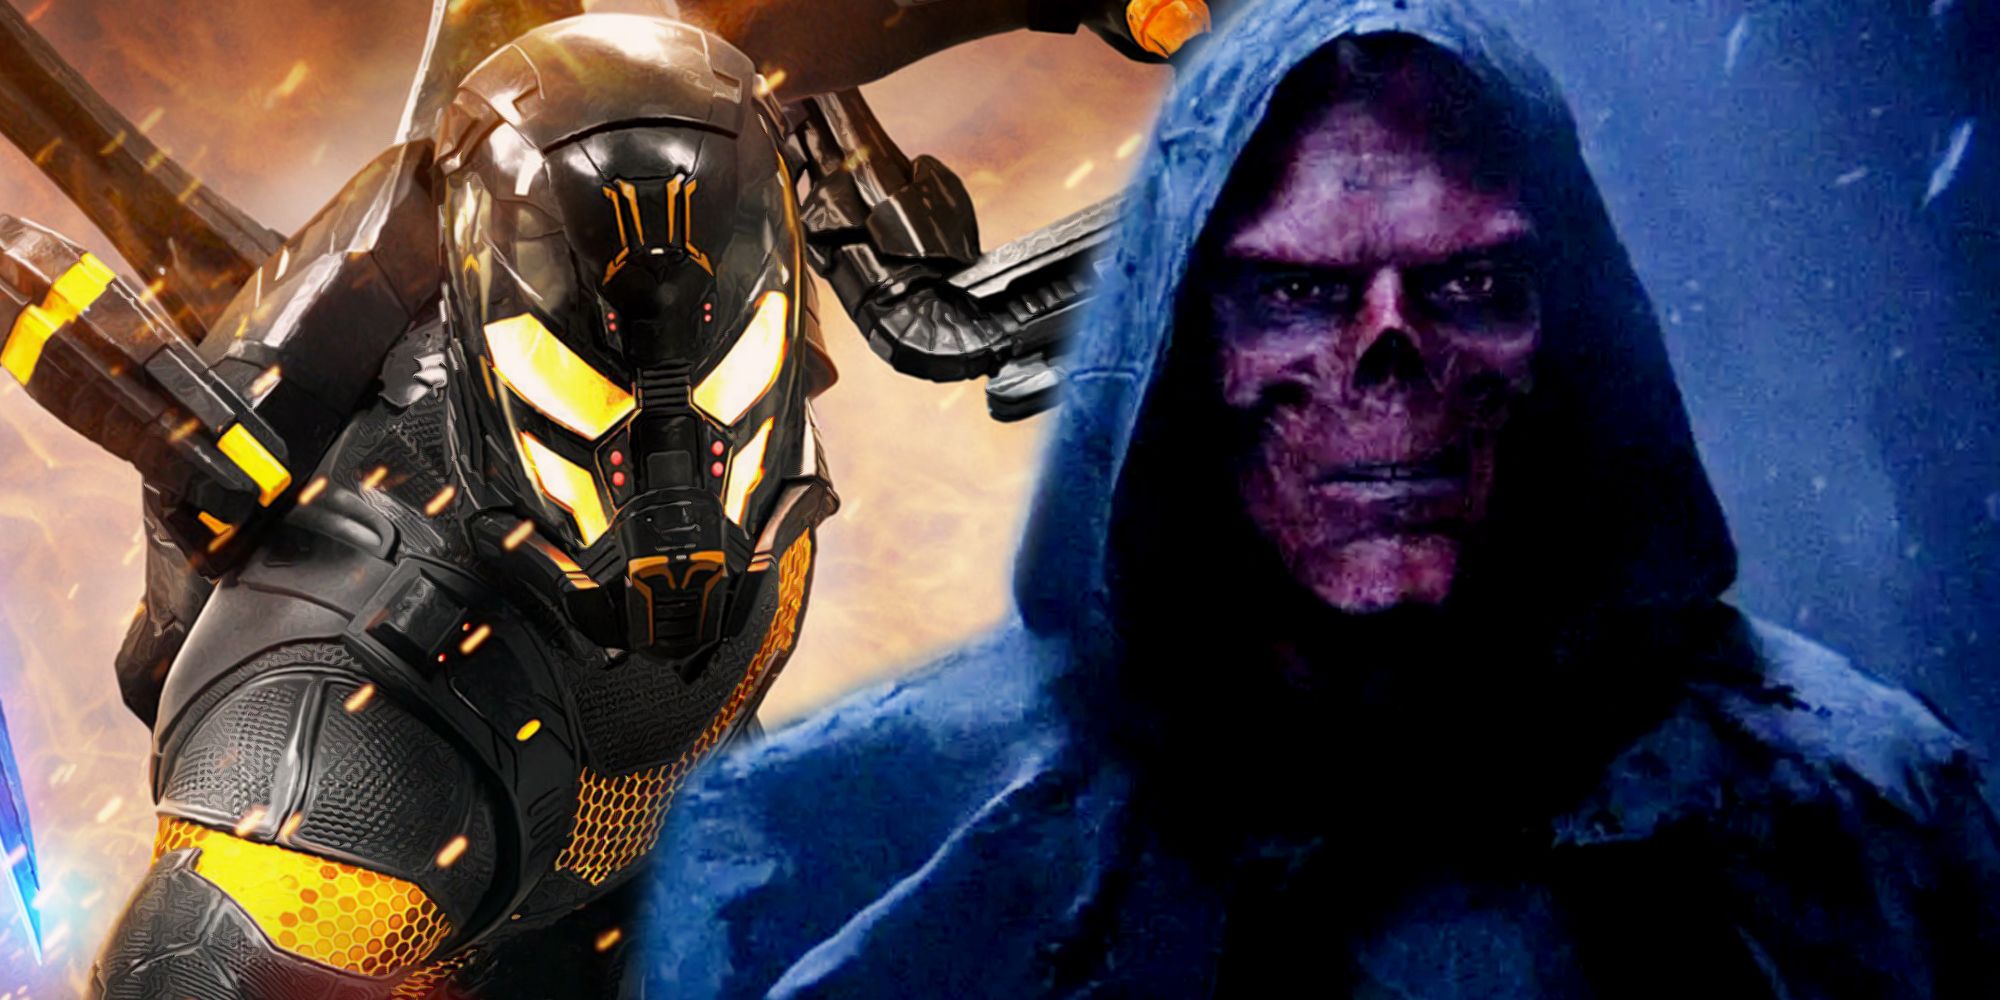 Ant-Man Villain Yellowjacket Is Still Alive in the MCU?